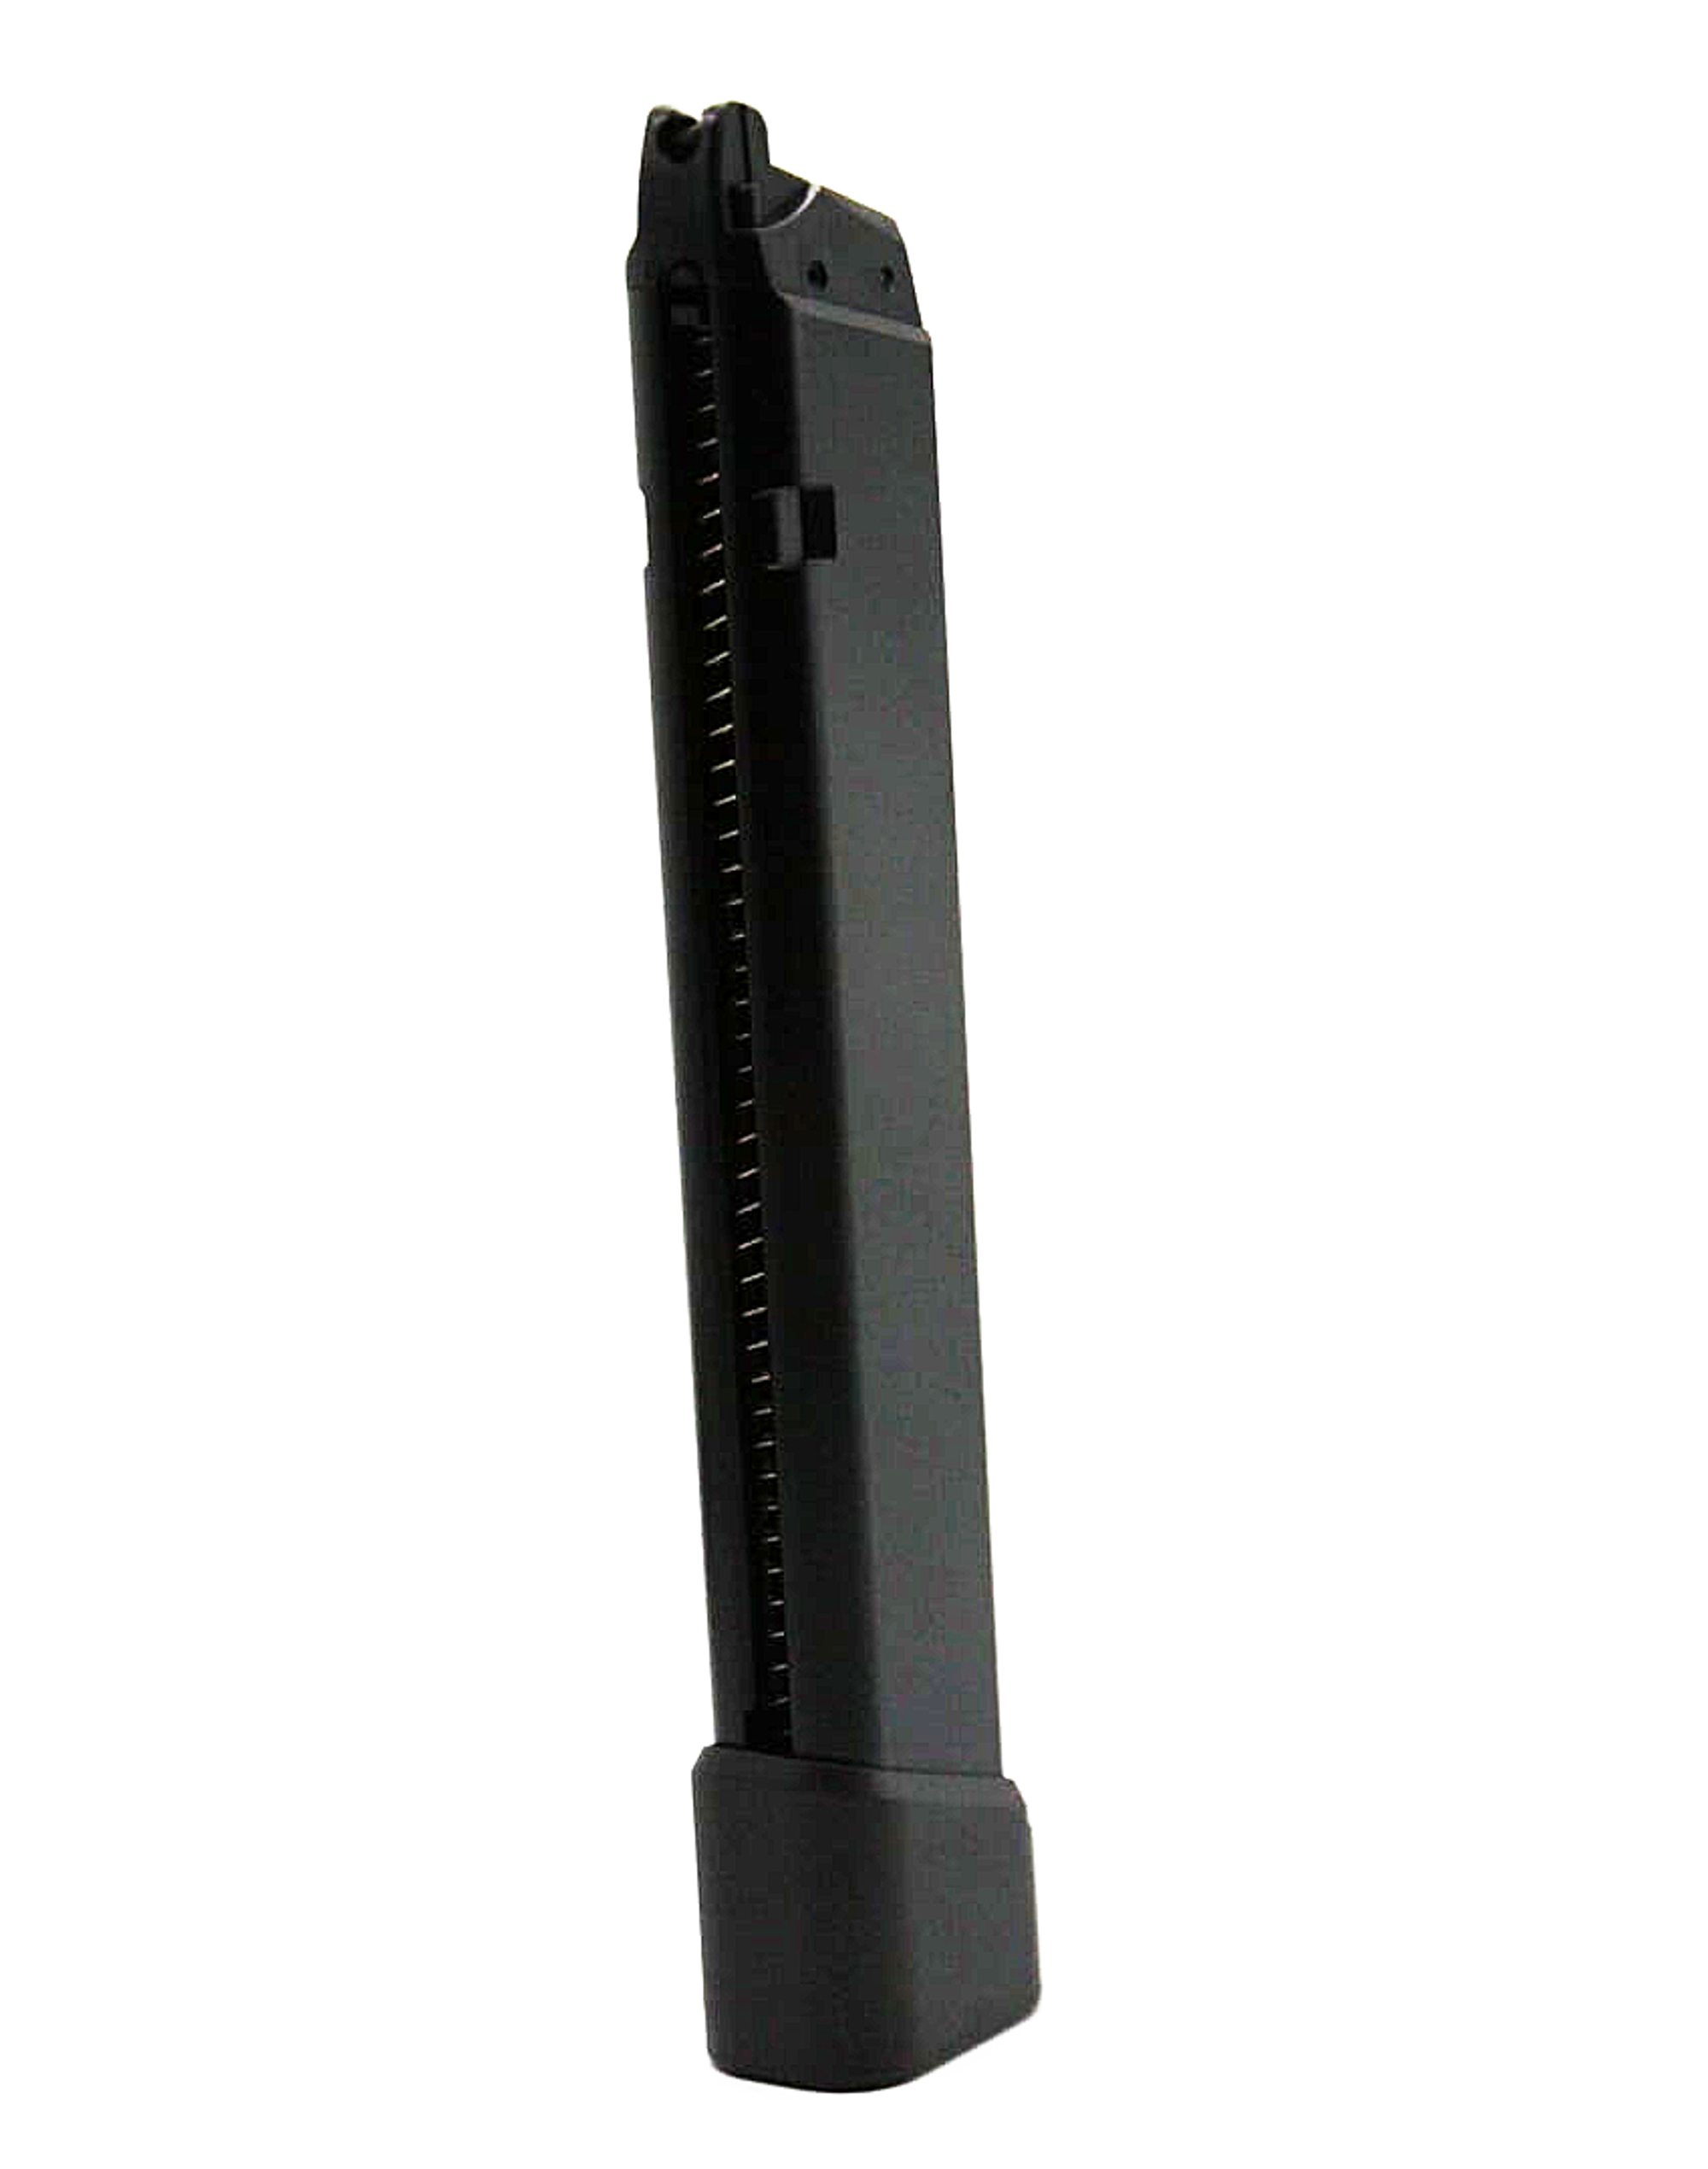 ACE 1 ARMS Extended Magazine - for Marui Compatible G series PistolGBB Airsoft